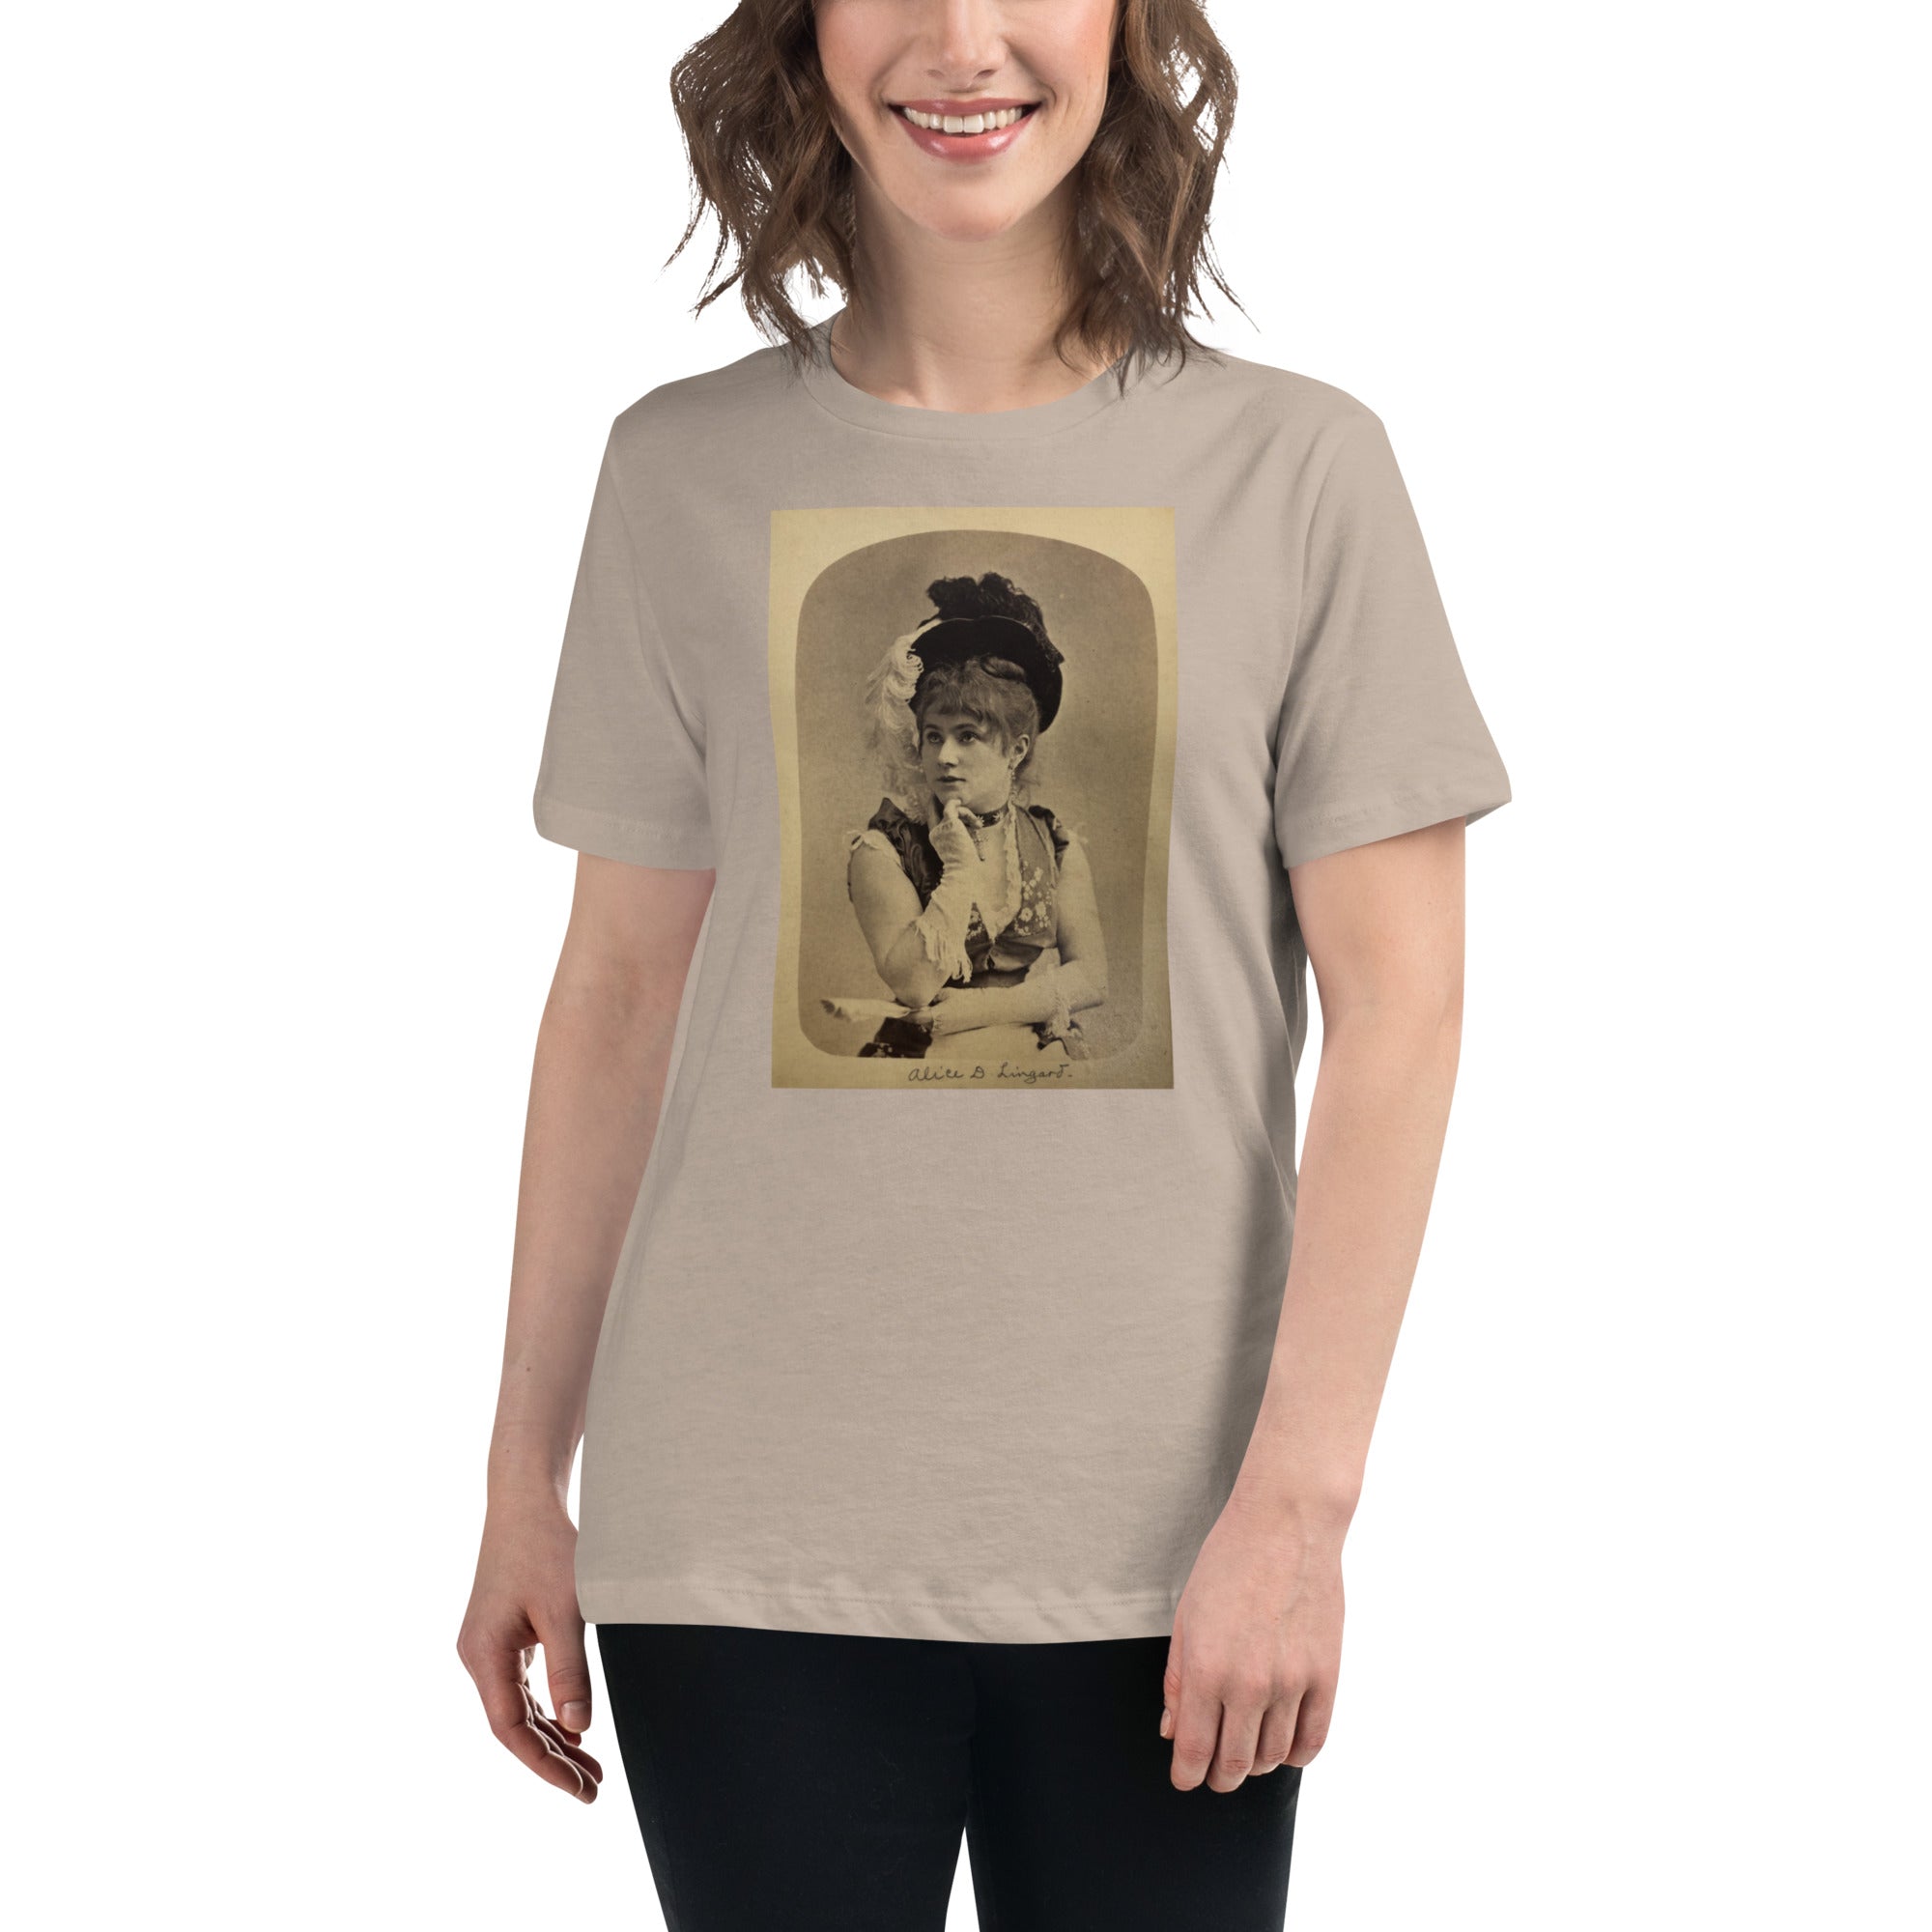 Old Timey Actress Photo Women's Relaxed T-Shirt